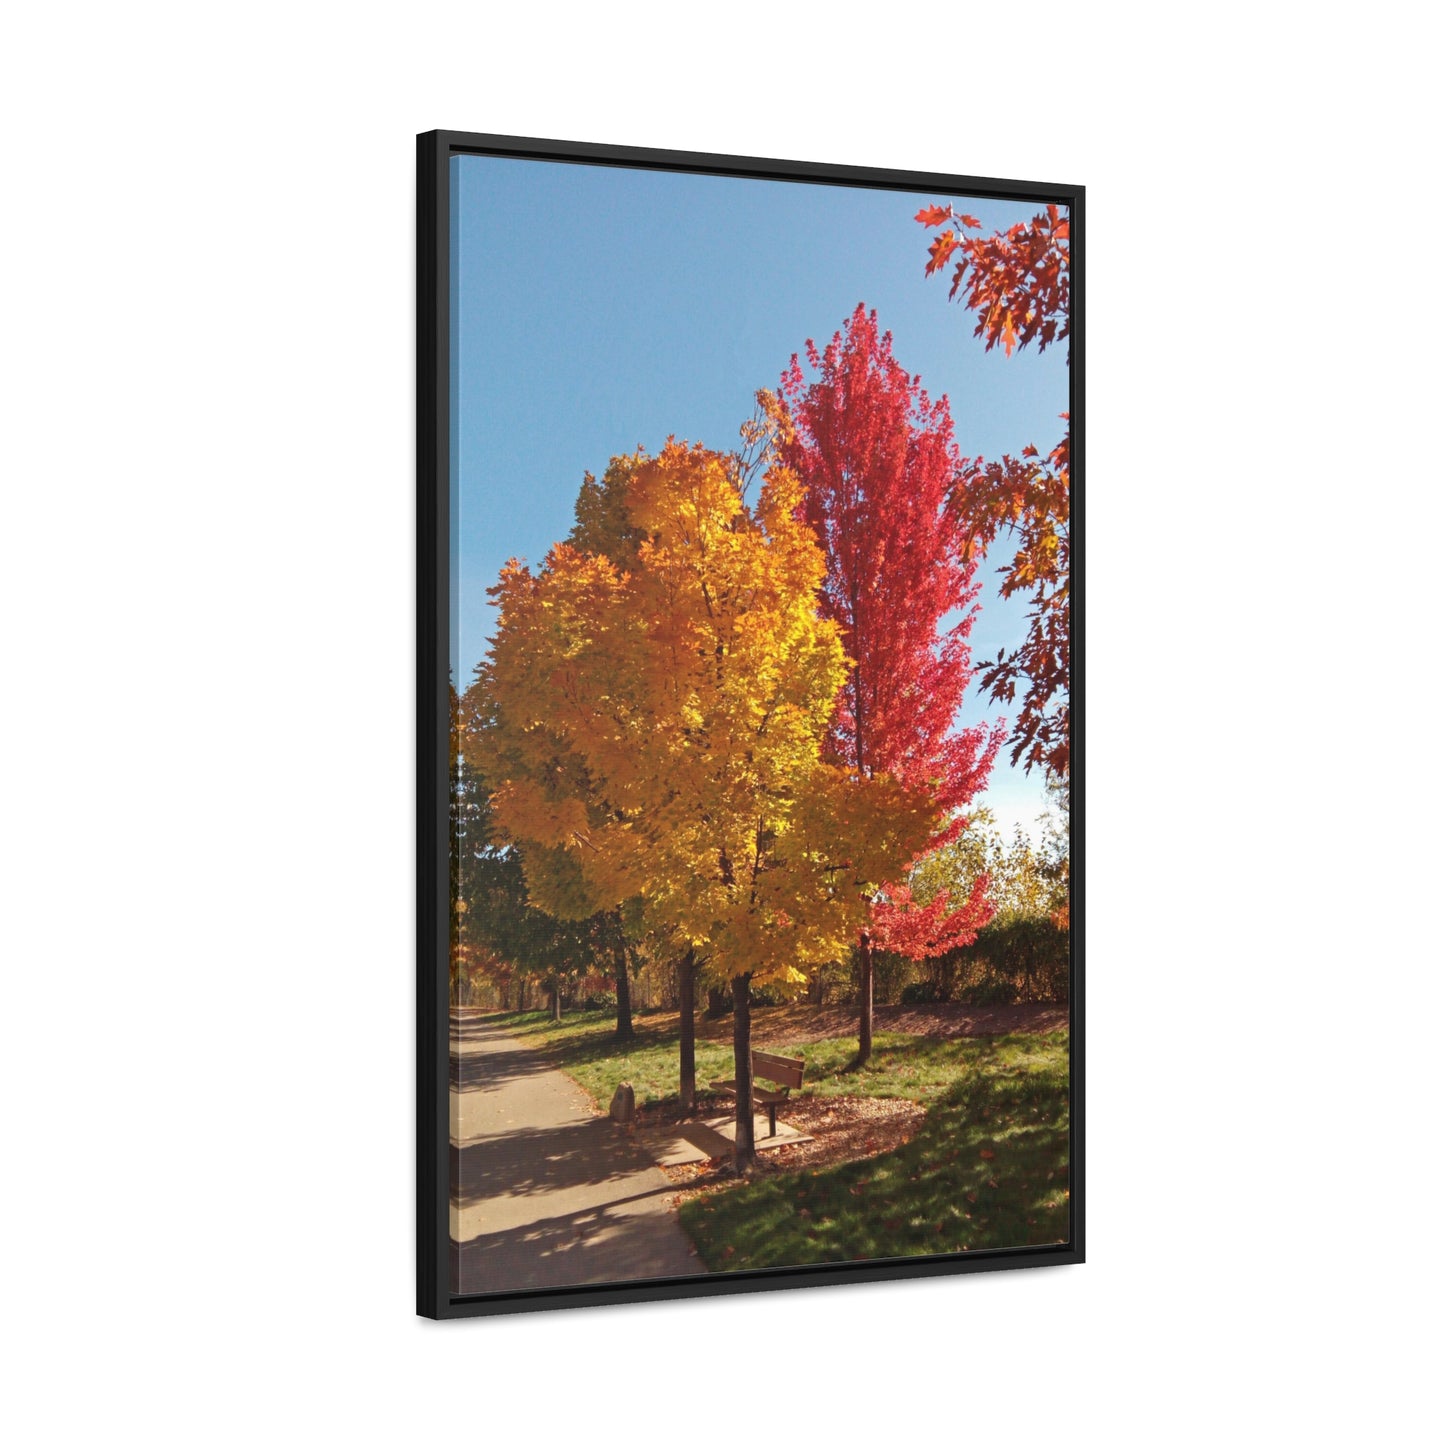 Autumn Bench Gallery Canvas Wraps Framed